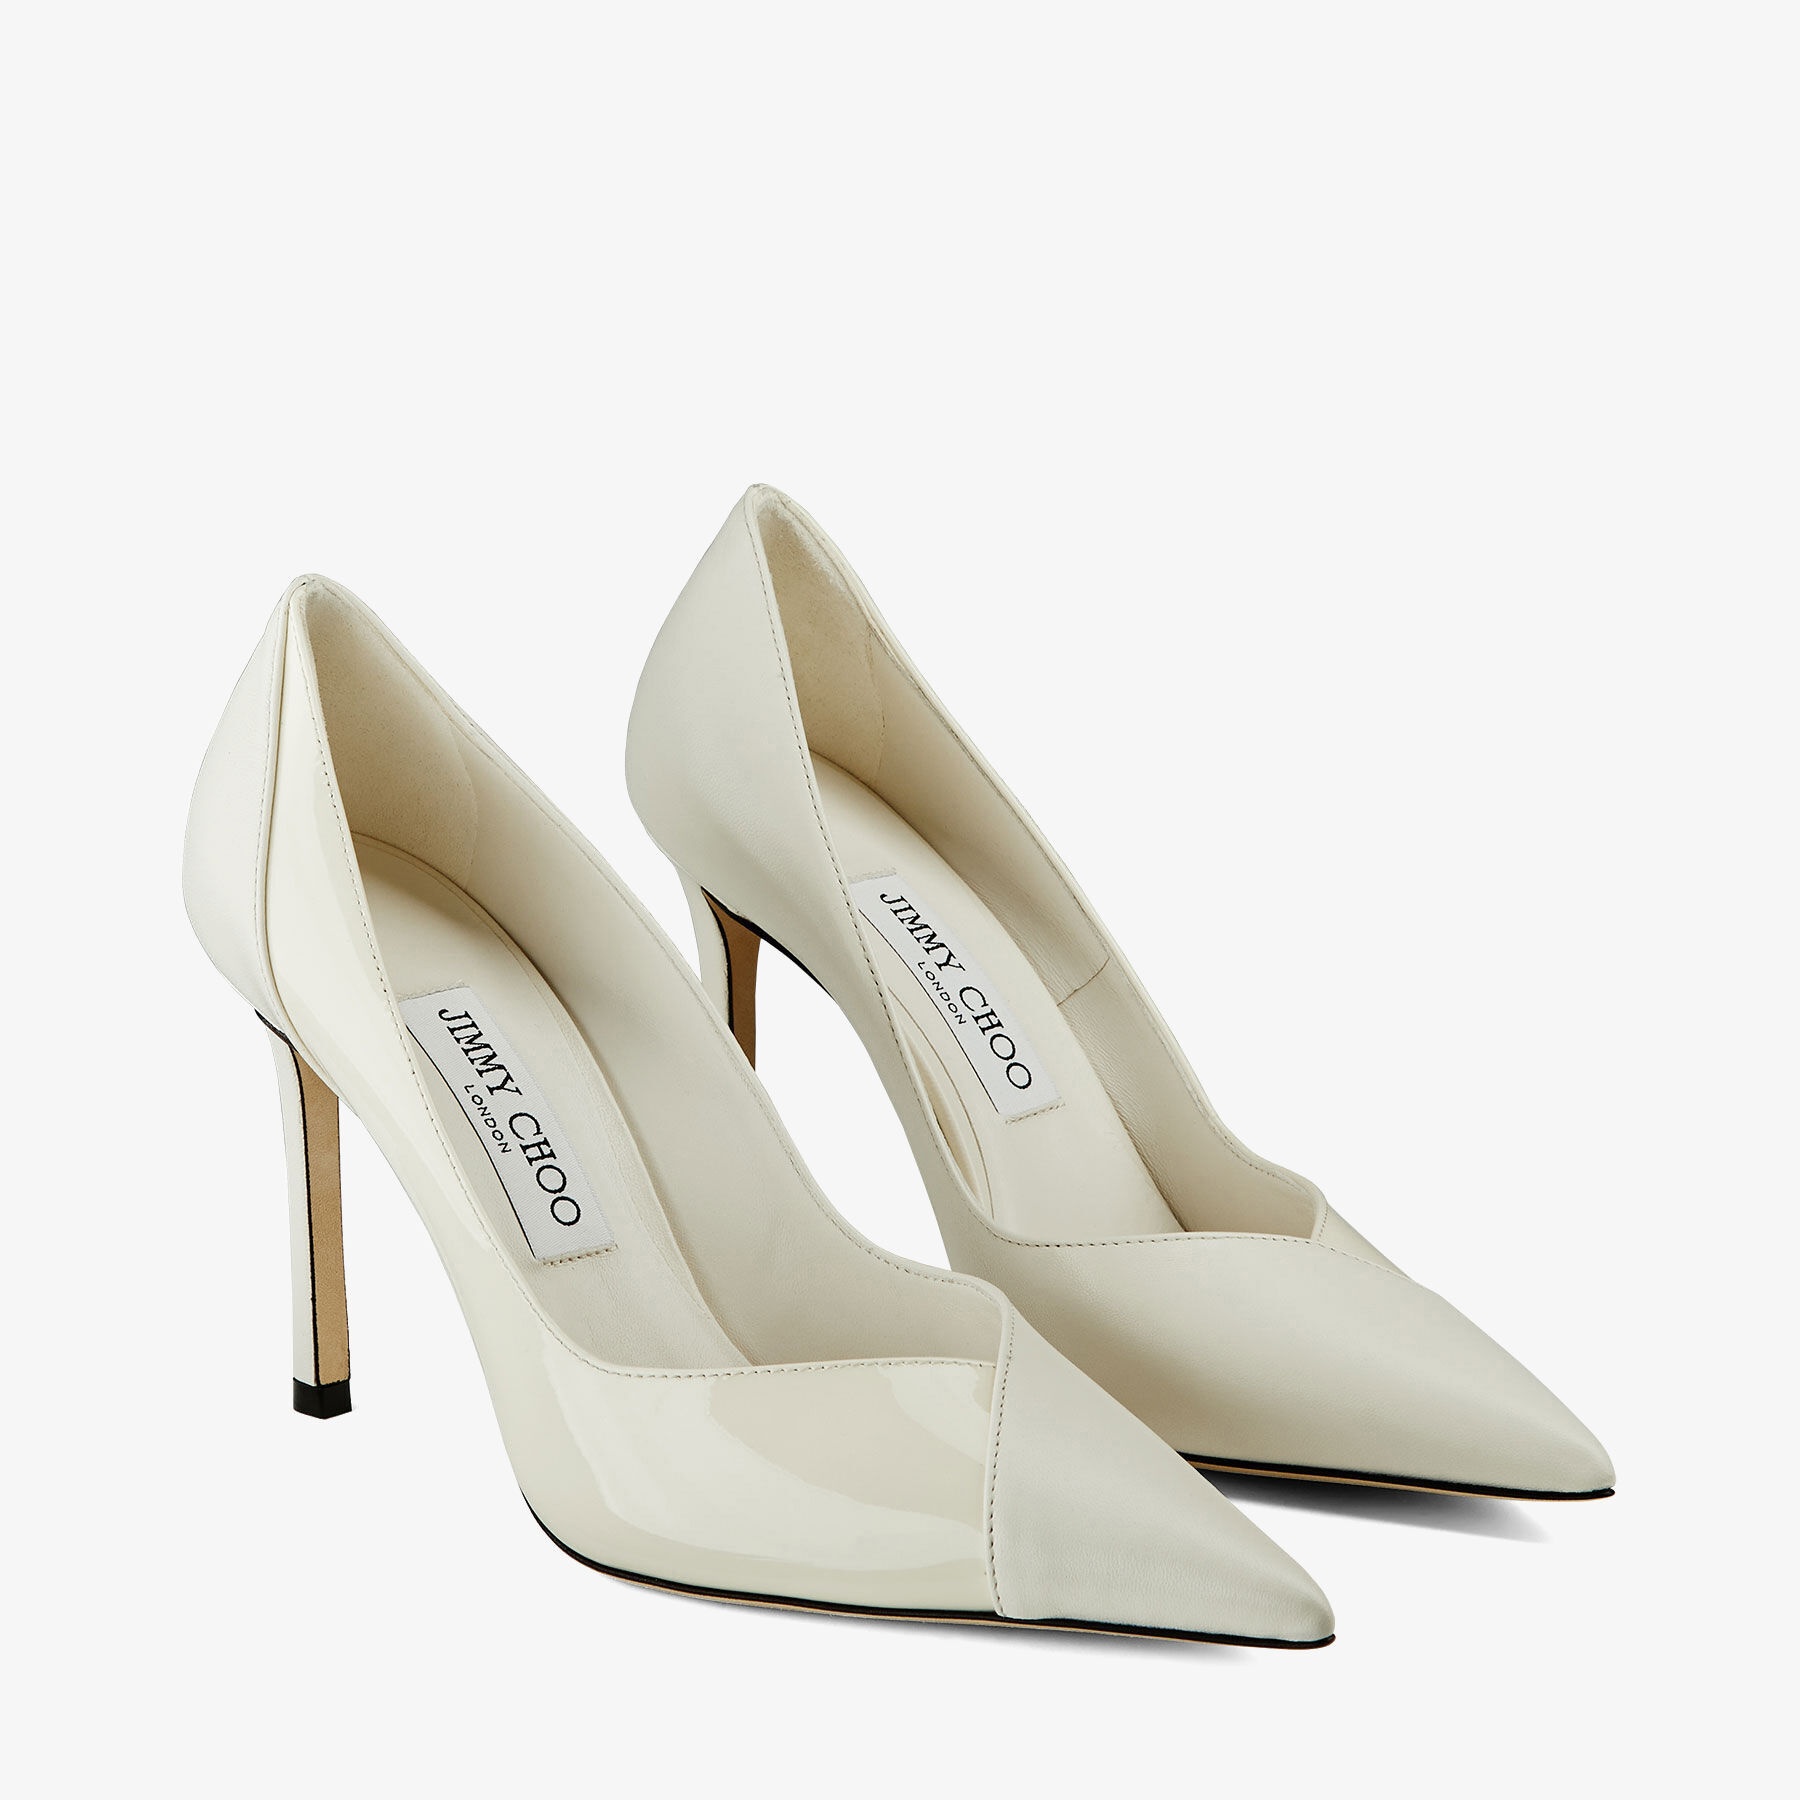 Cass 95
Latte Nappa and Patent Leather Pumps - 3